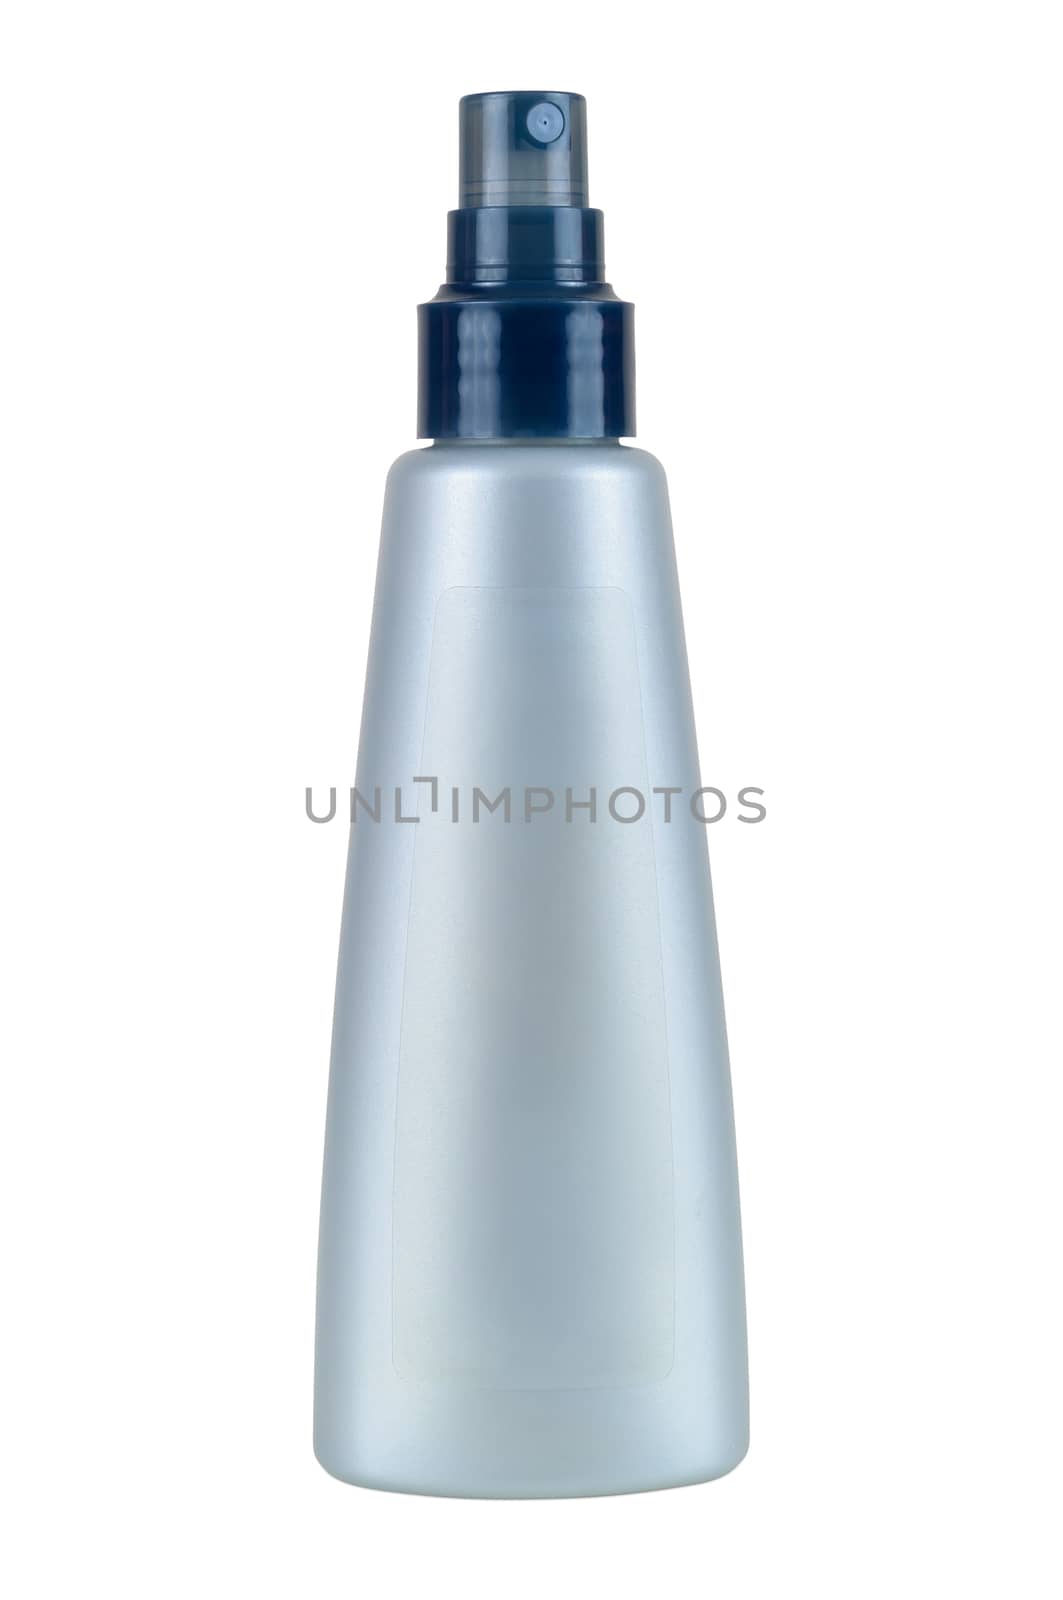 Cosmetic bottle on white background by mkos83